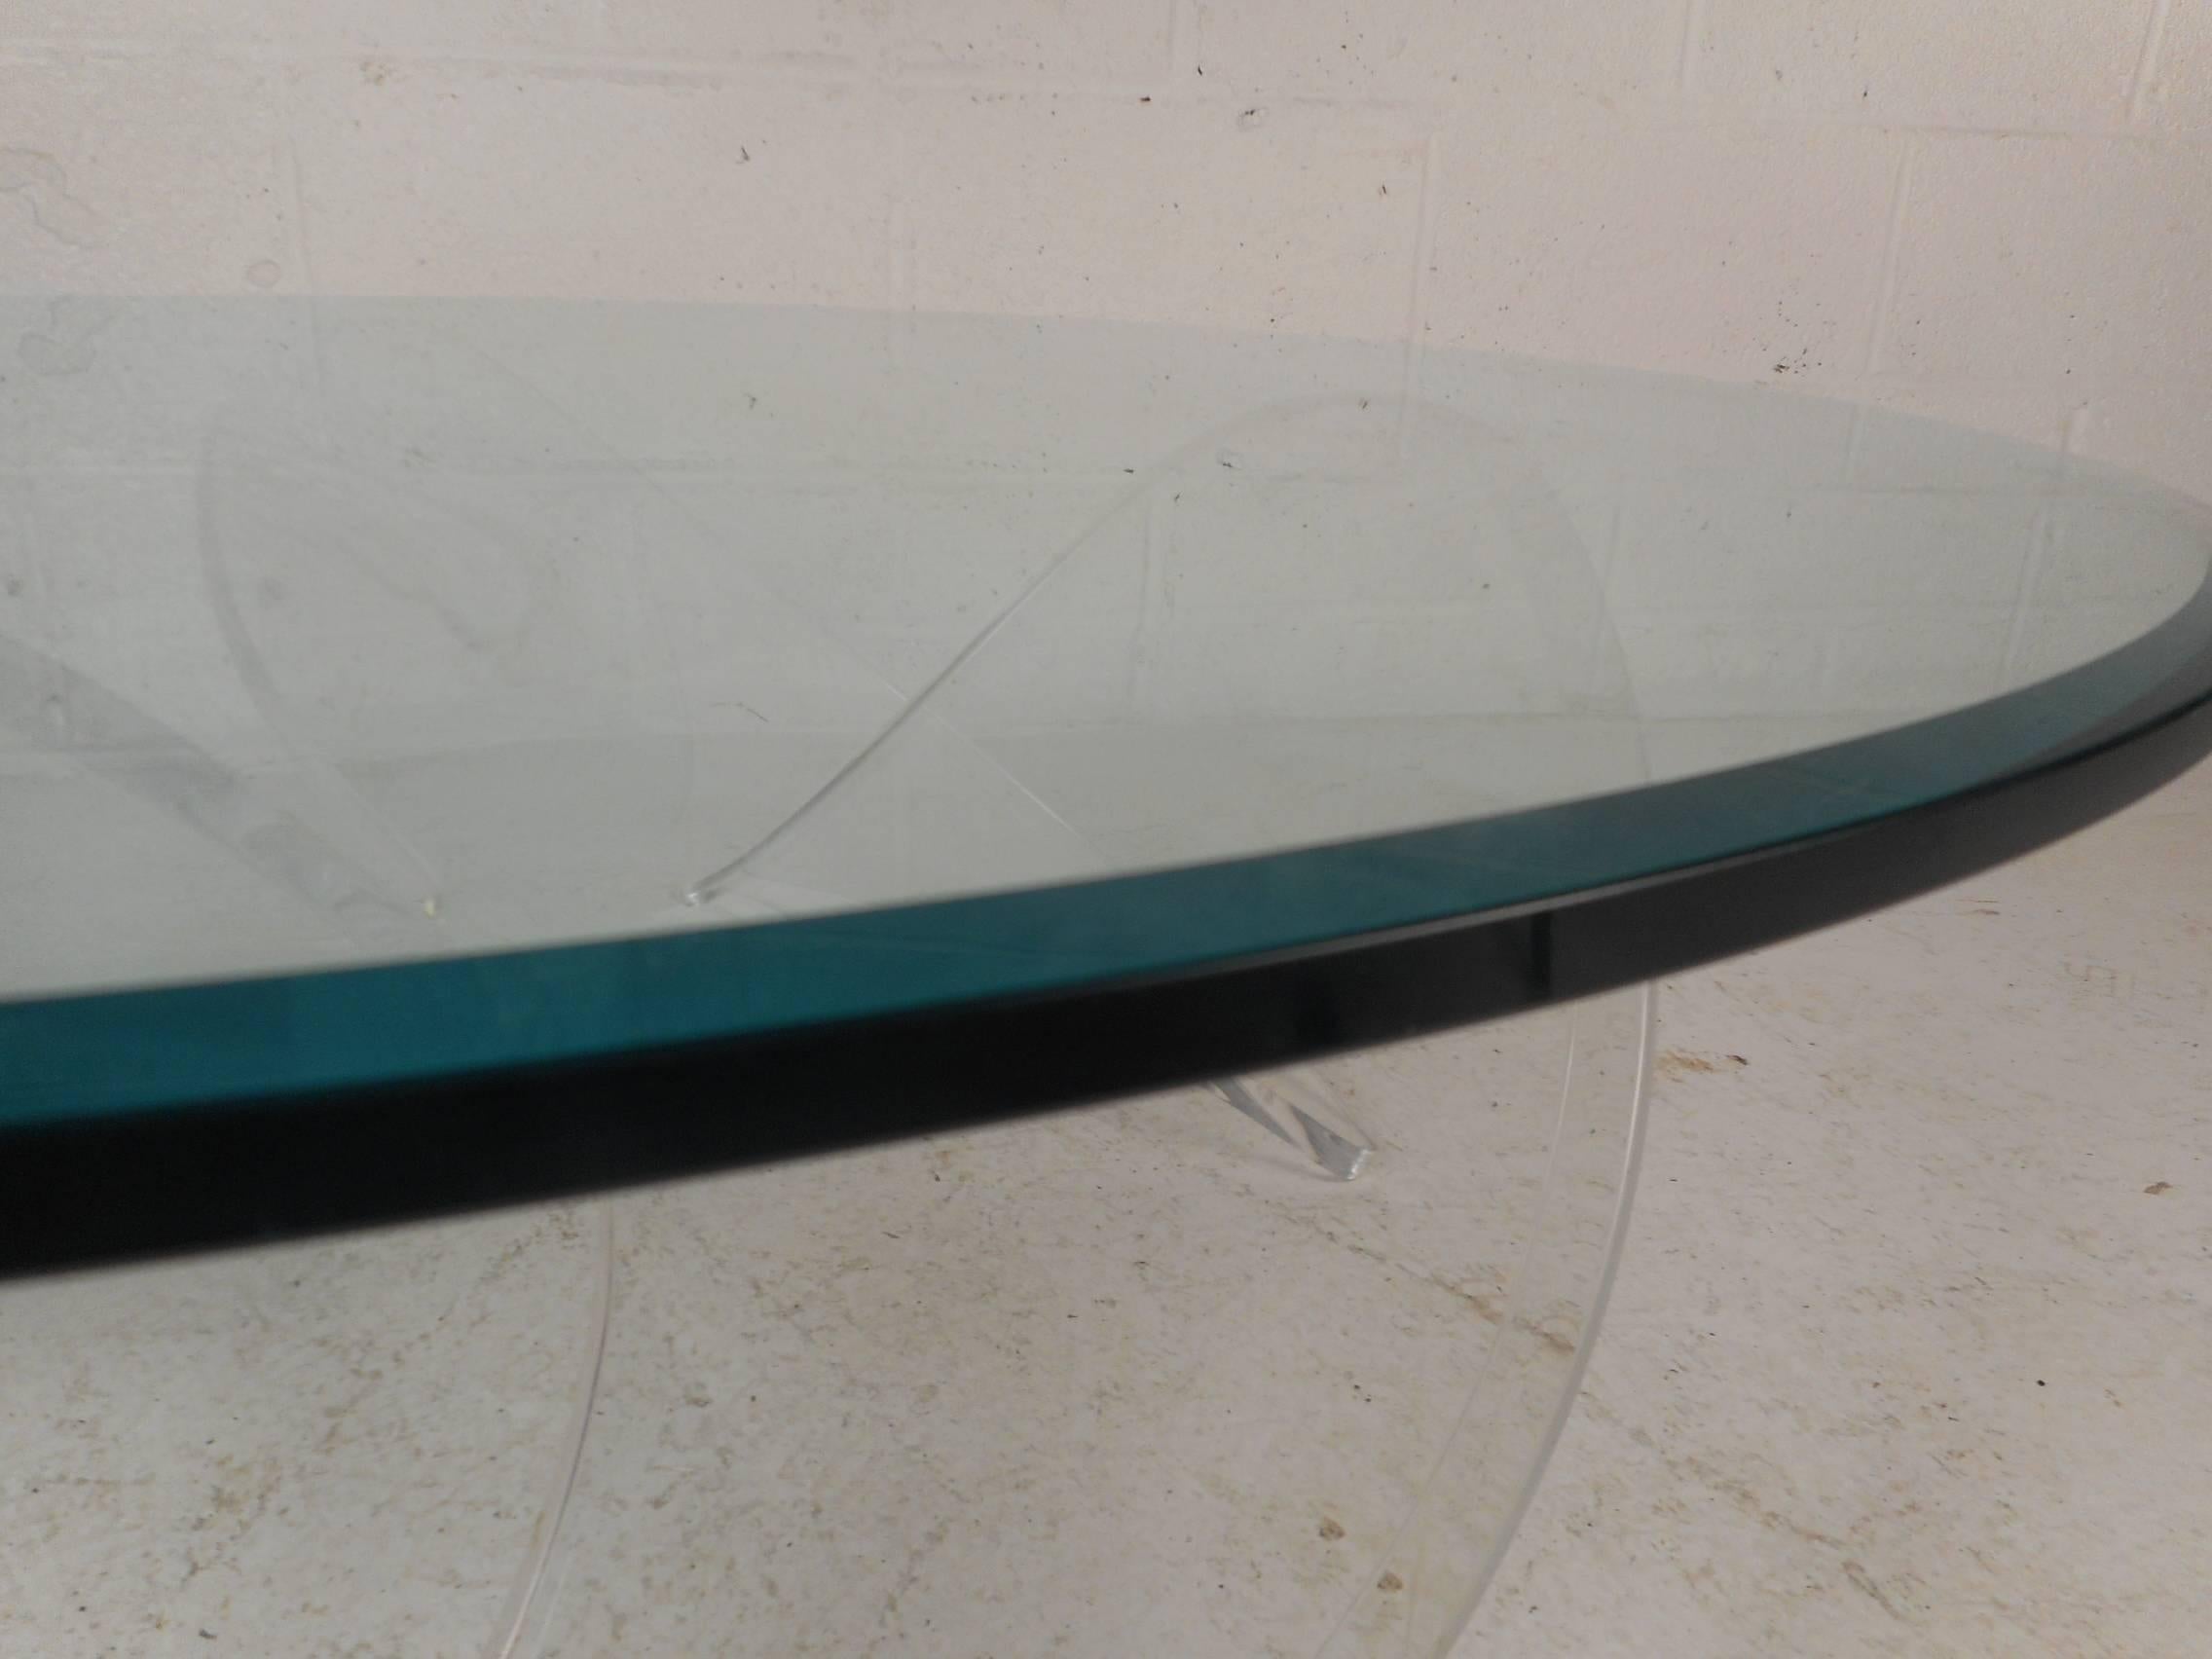 Late 20th Century Mid-Century Modern Knut Hesterburg Style Lucite Propeller Coffee Table